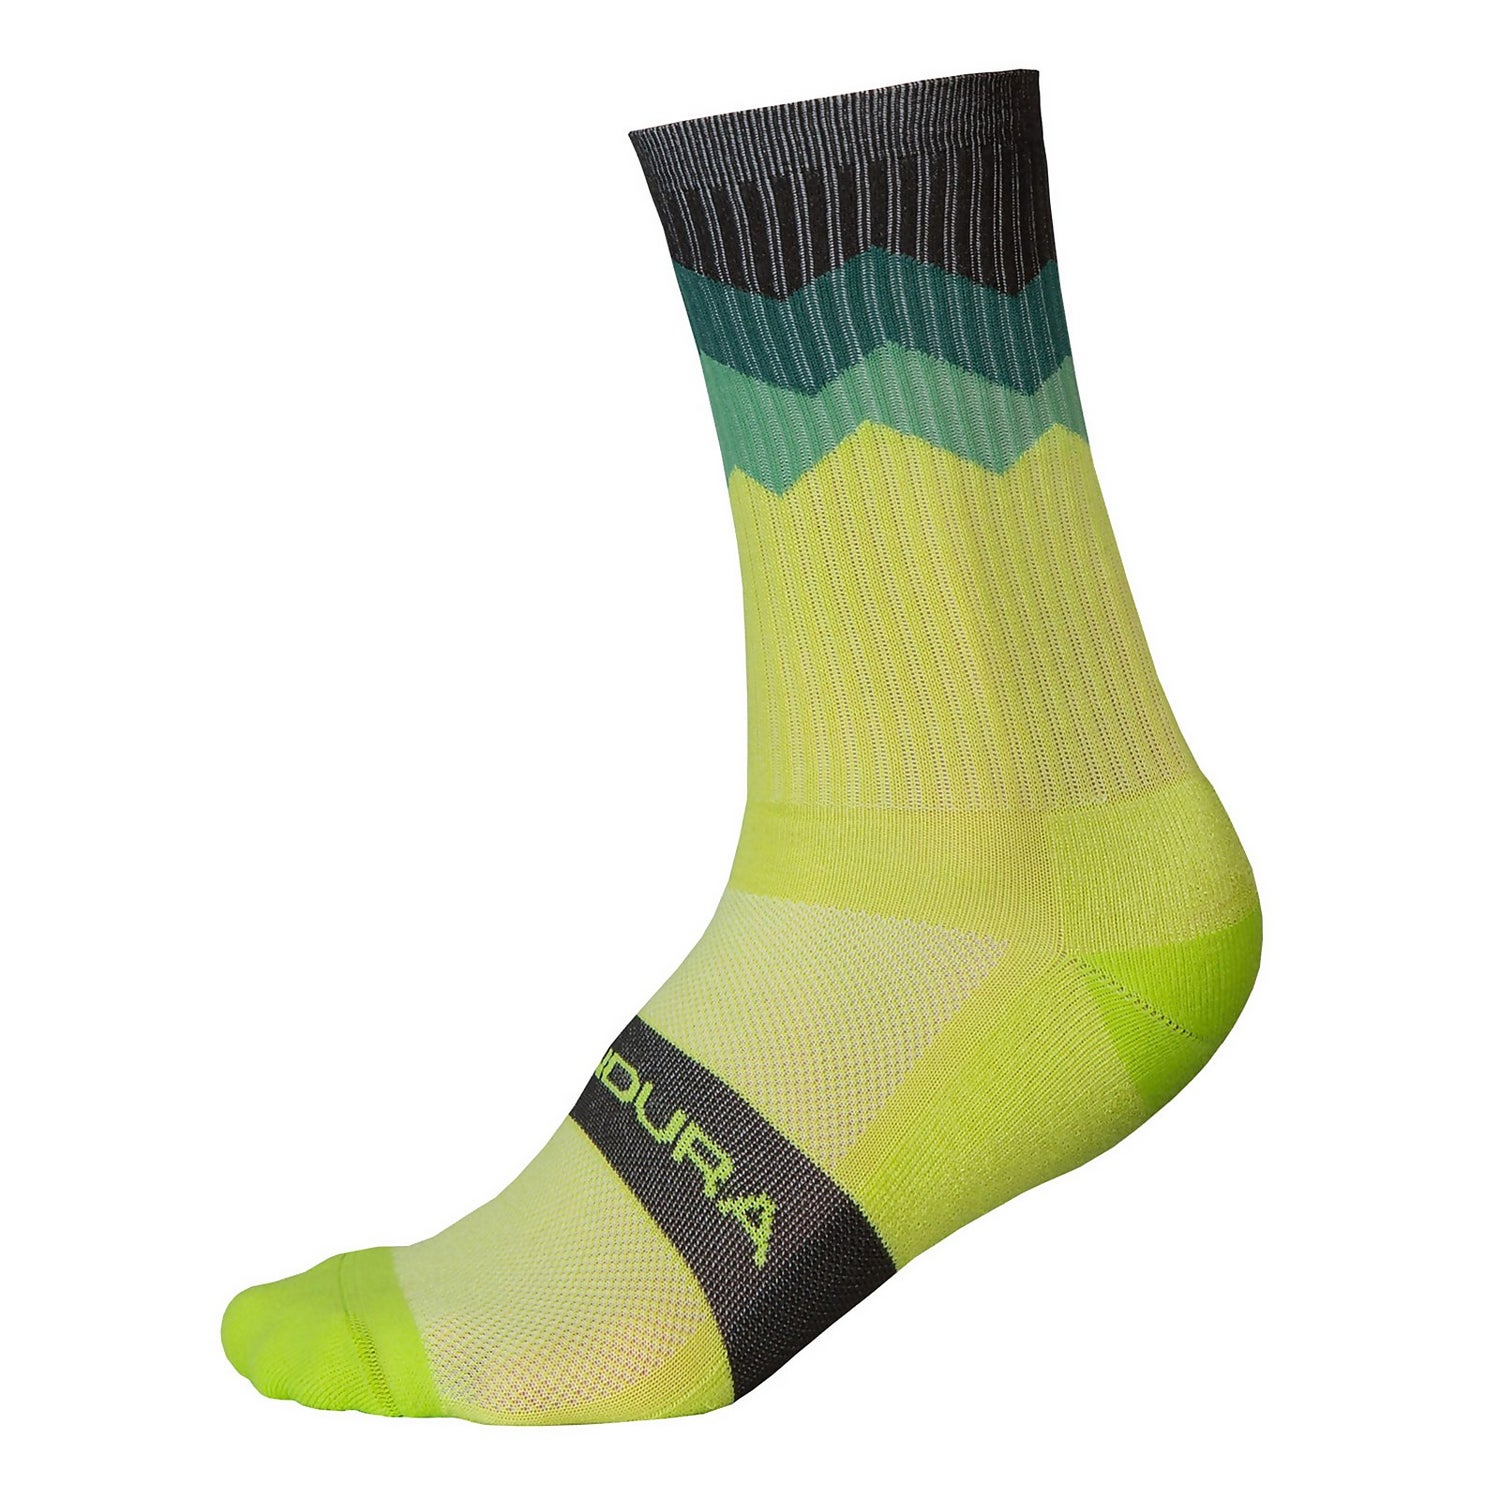 Men's Jagged Sock - Lime Green - S-M